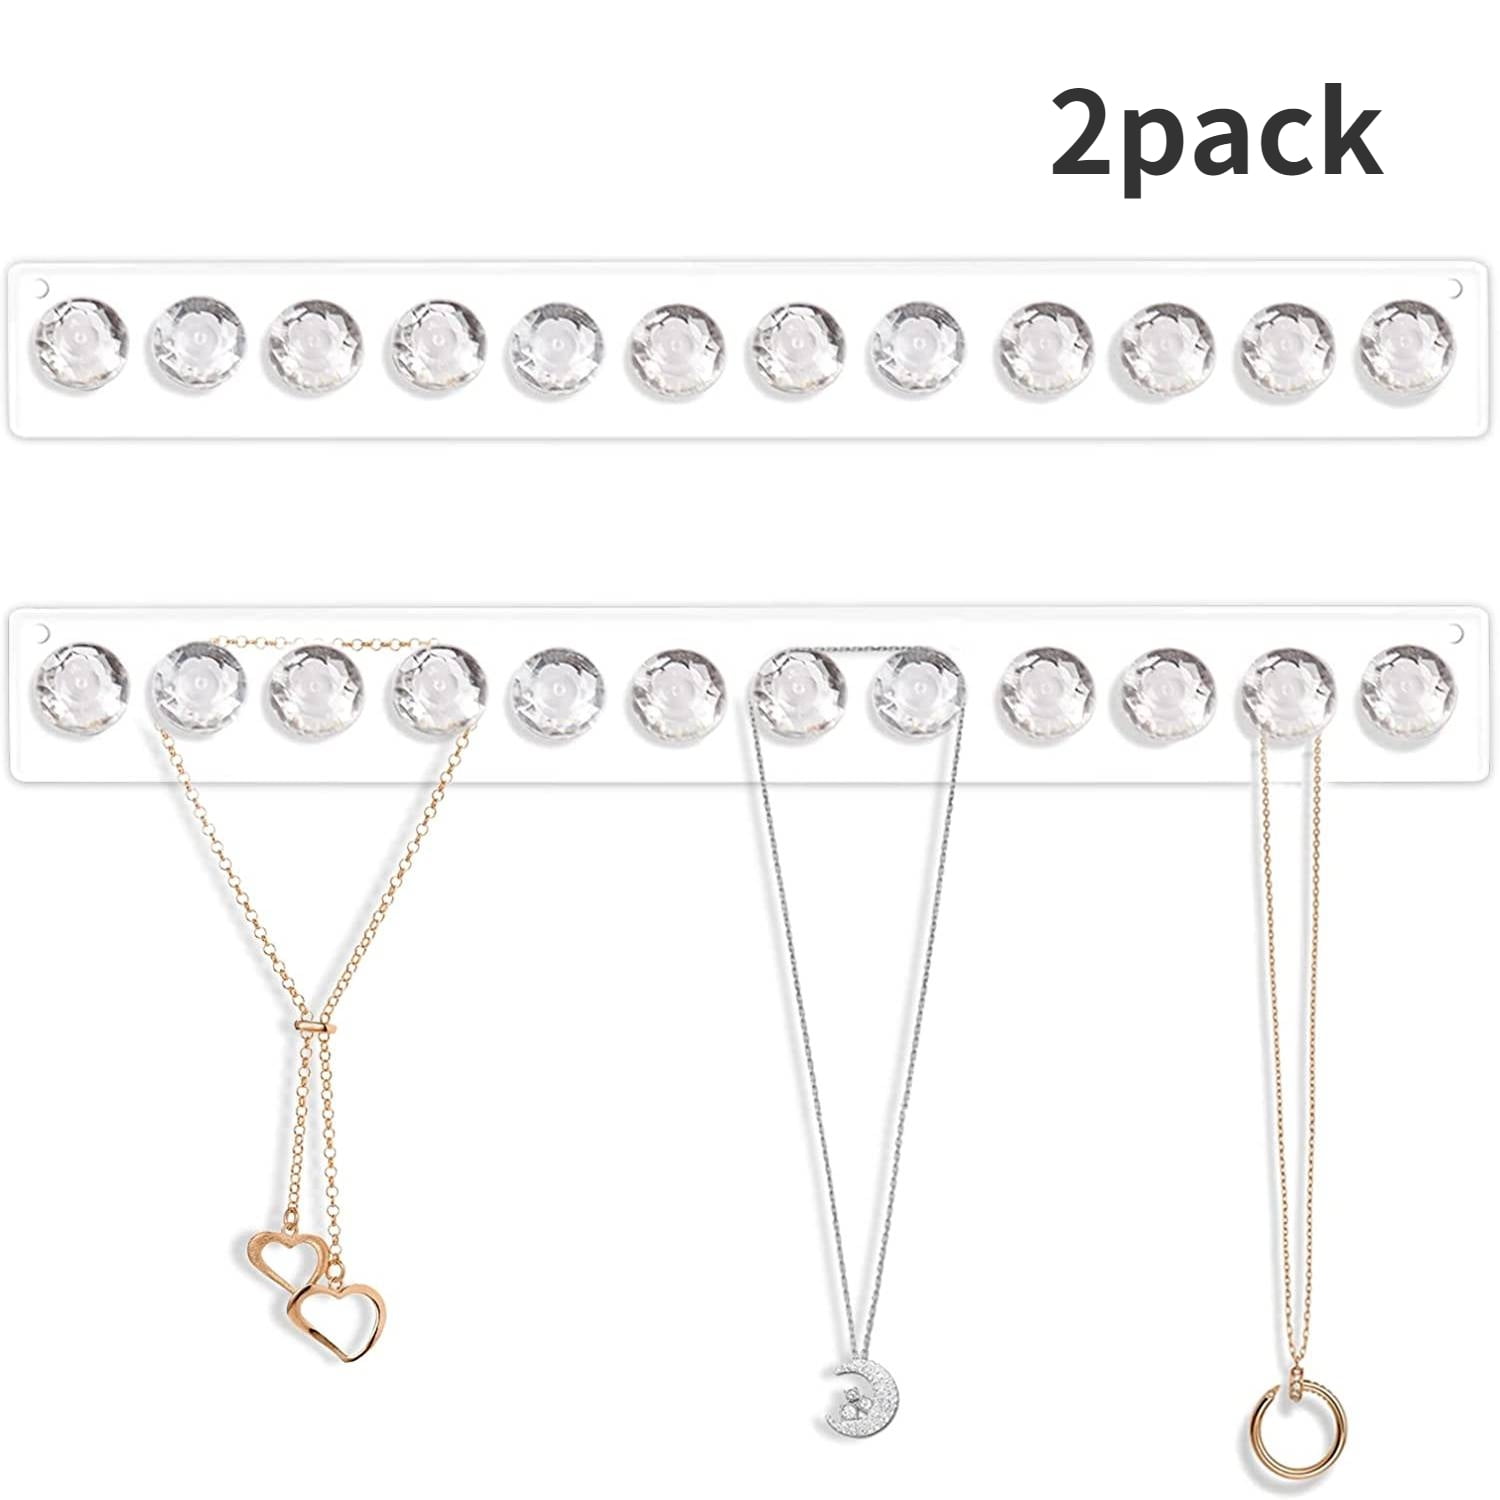  KALIONE 2 Pack Necklace Holder Wall Mounted, Hanging Necklace  Holder Necklace Organizer Adhesive Plastic Necklaces Hanger with 12 Jewelry  Hooks for Necklaces, Bracelets, Earrings, Keys, White : Home & Kitchen